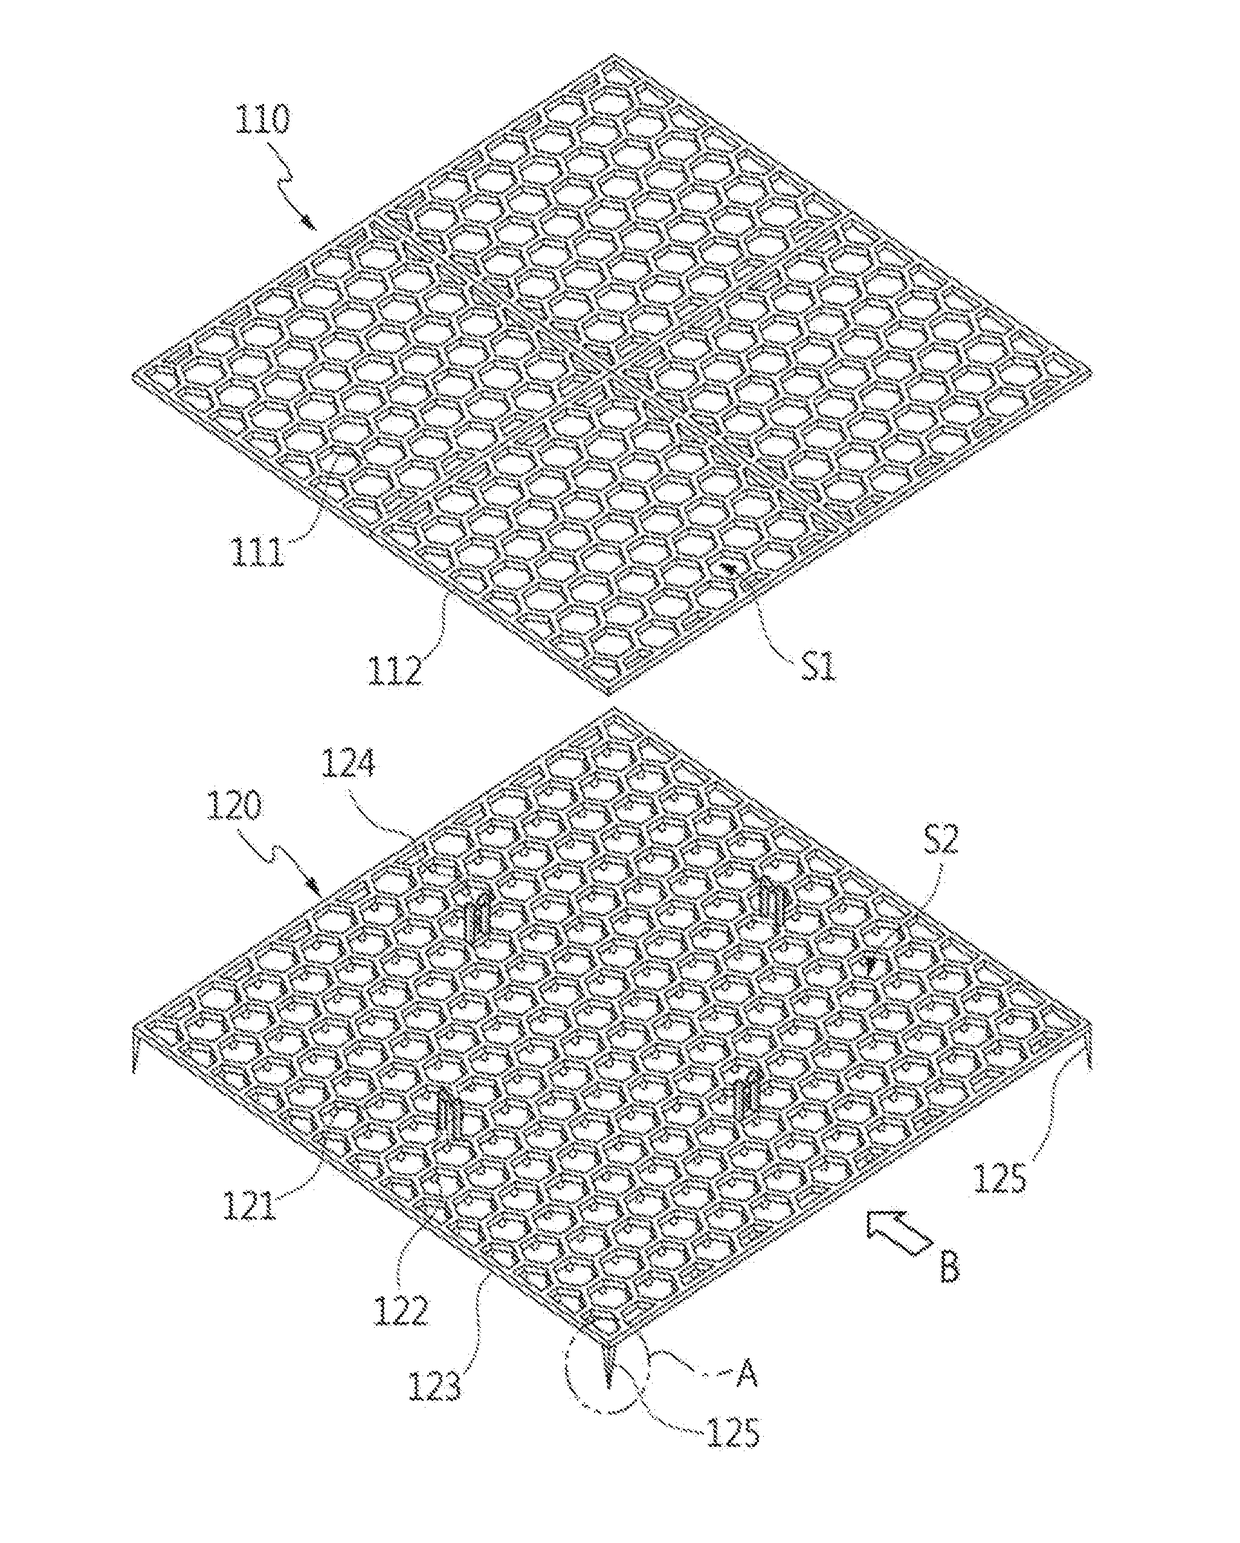 Grass protection mat with bottom supporting mat and method of constructing the same